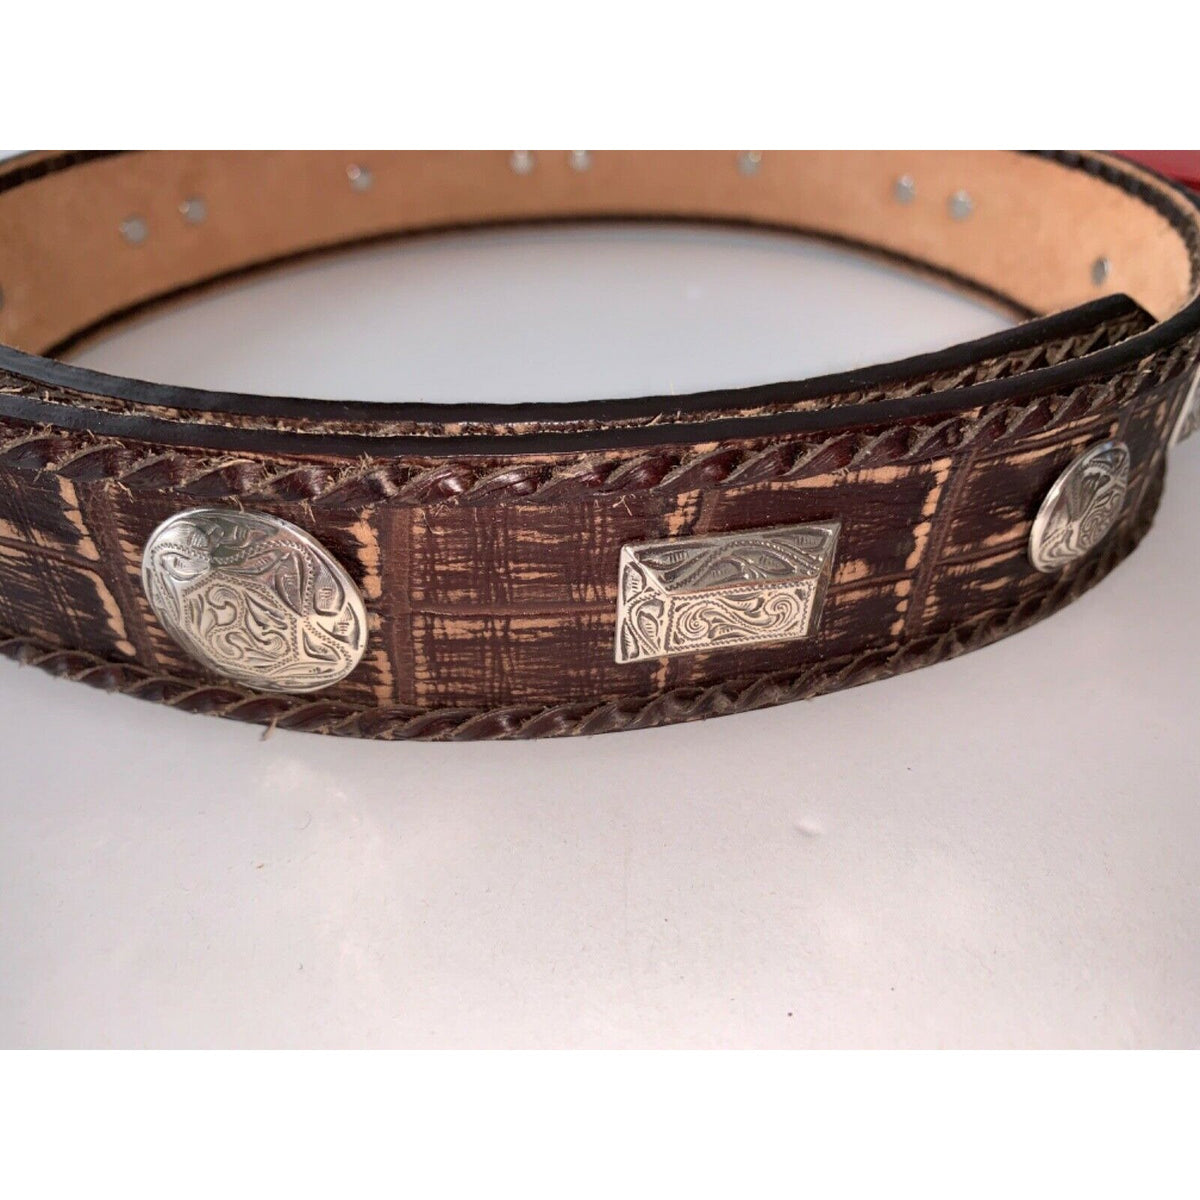 BRIGHTON 32 silver buckle wide leather belt brown medallions asiago concho